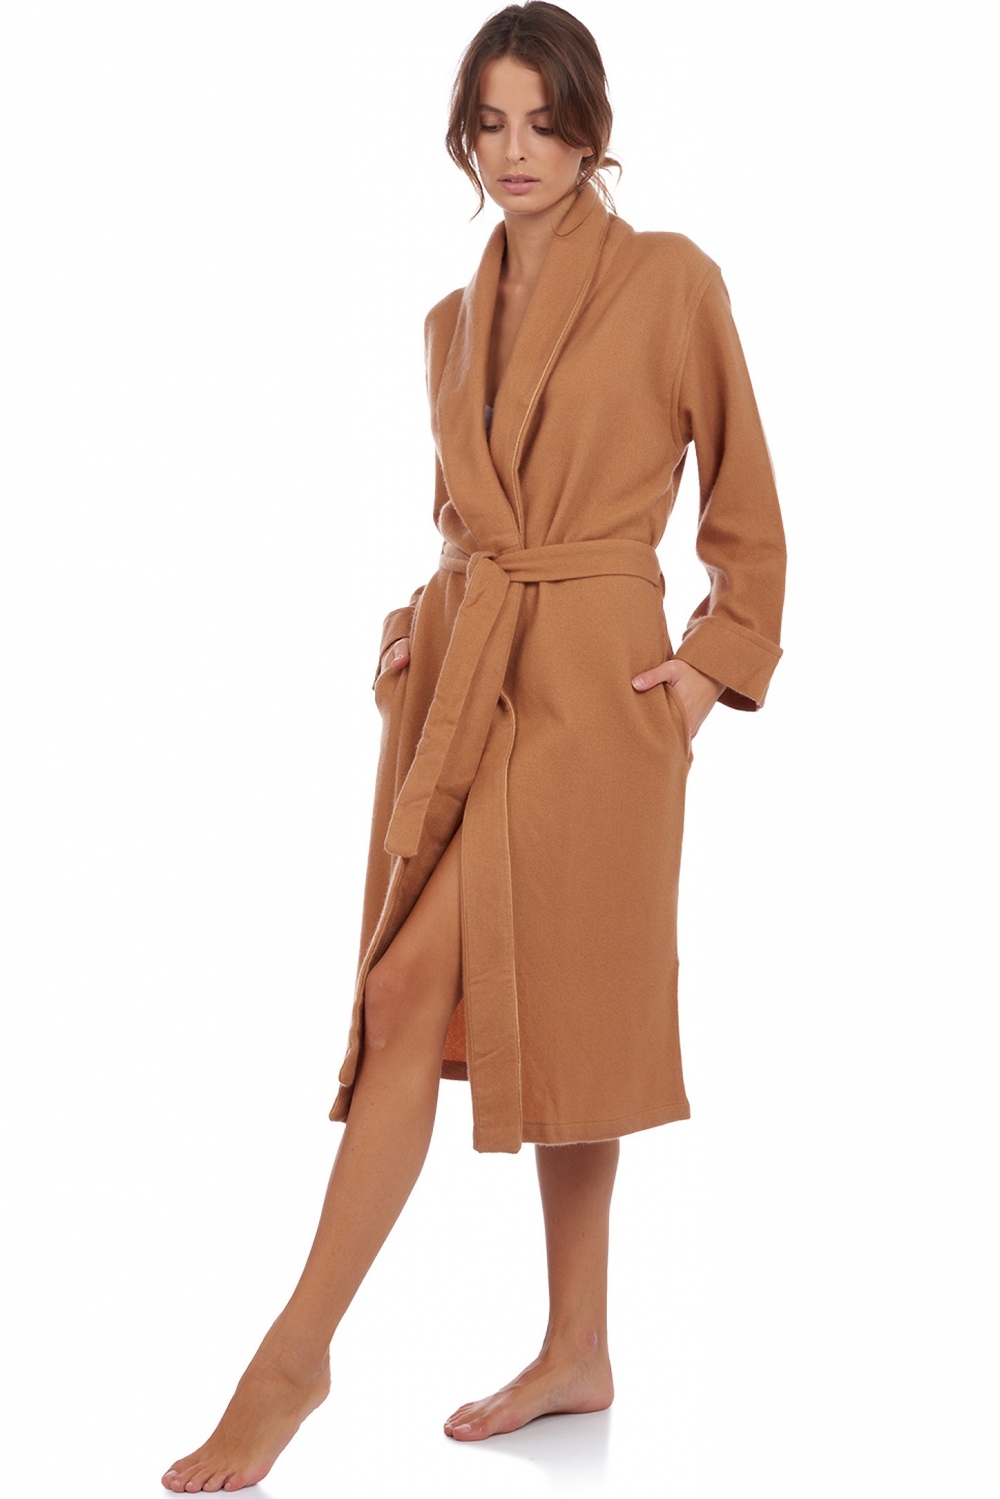 Cashmere ladies dressing gown mylady camel desert s4